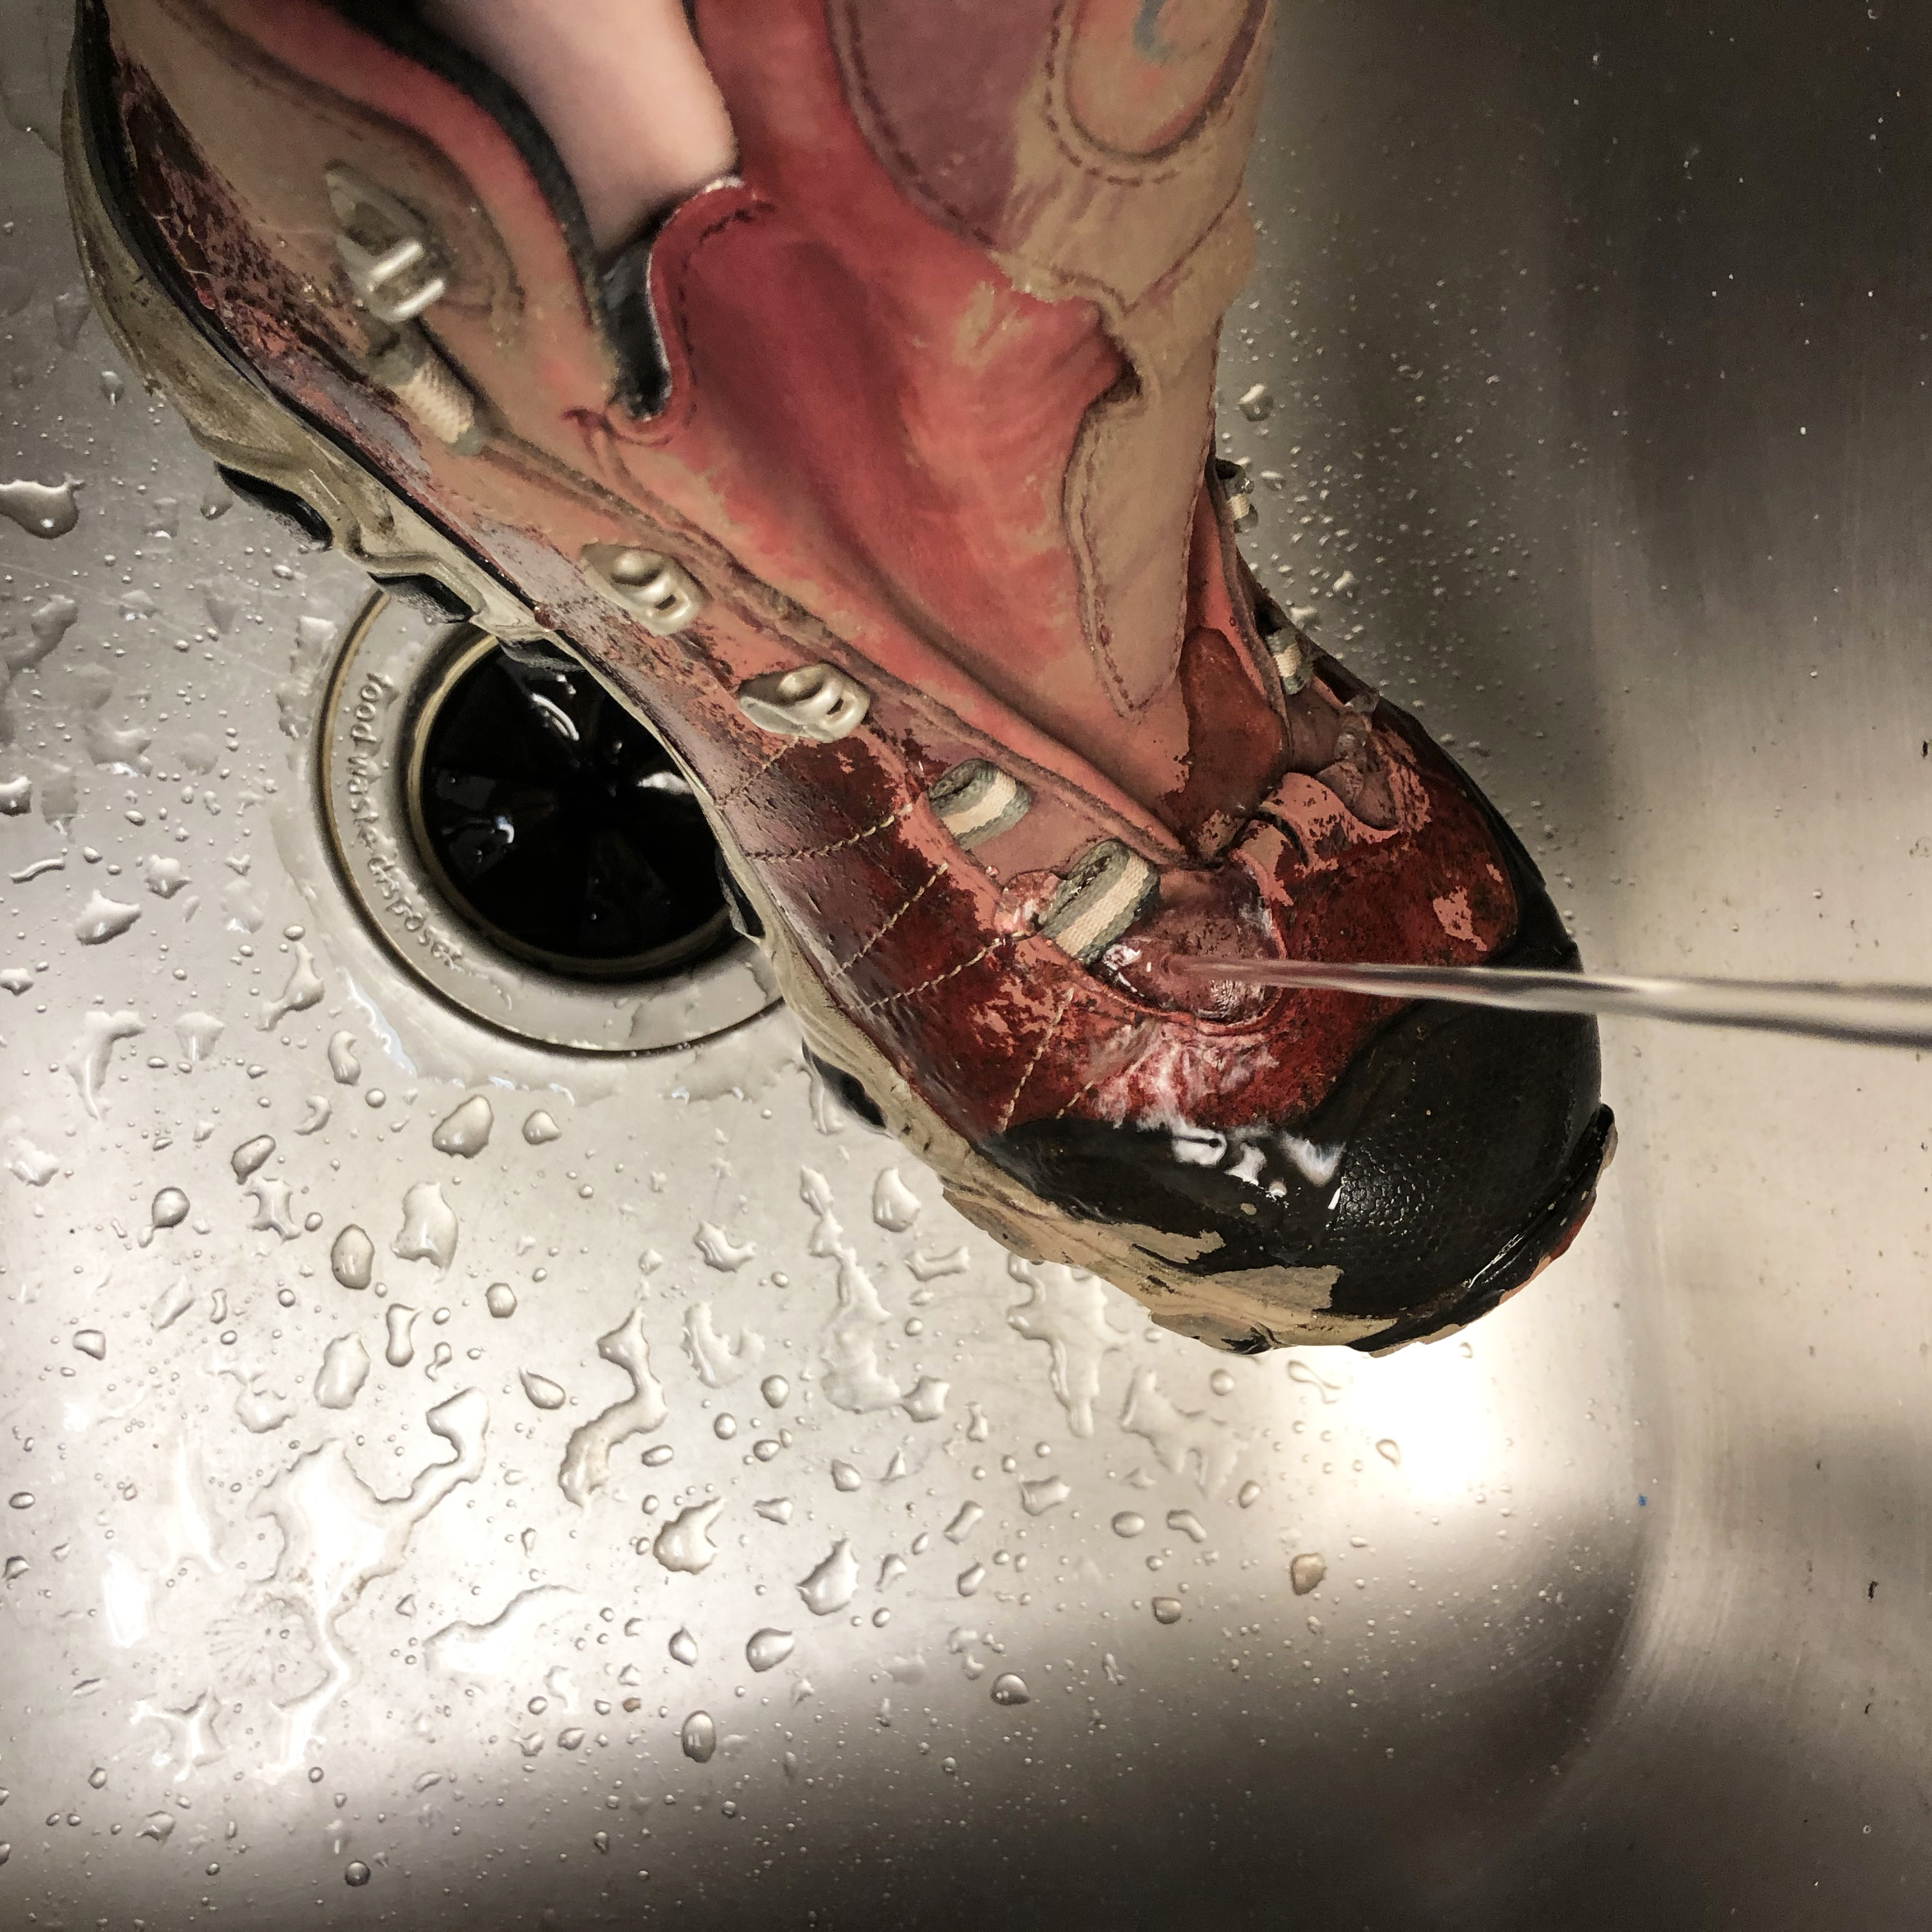 cleaning mud off shoes